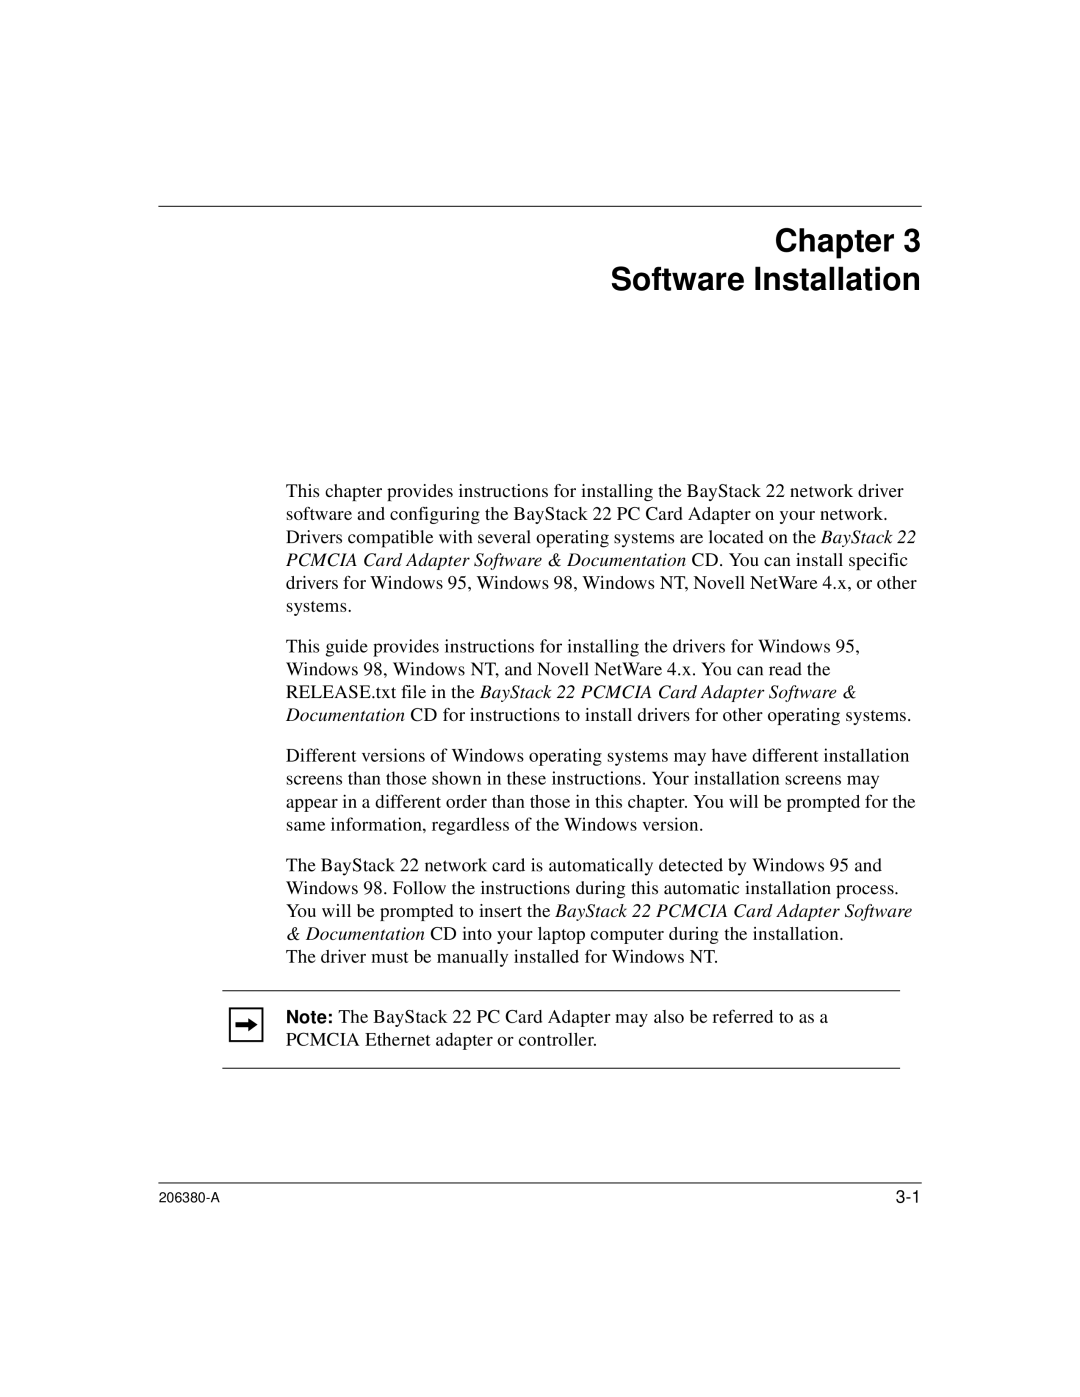 3Com 206380-A manual Chapter Software Installation 